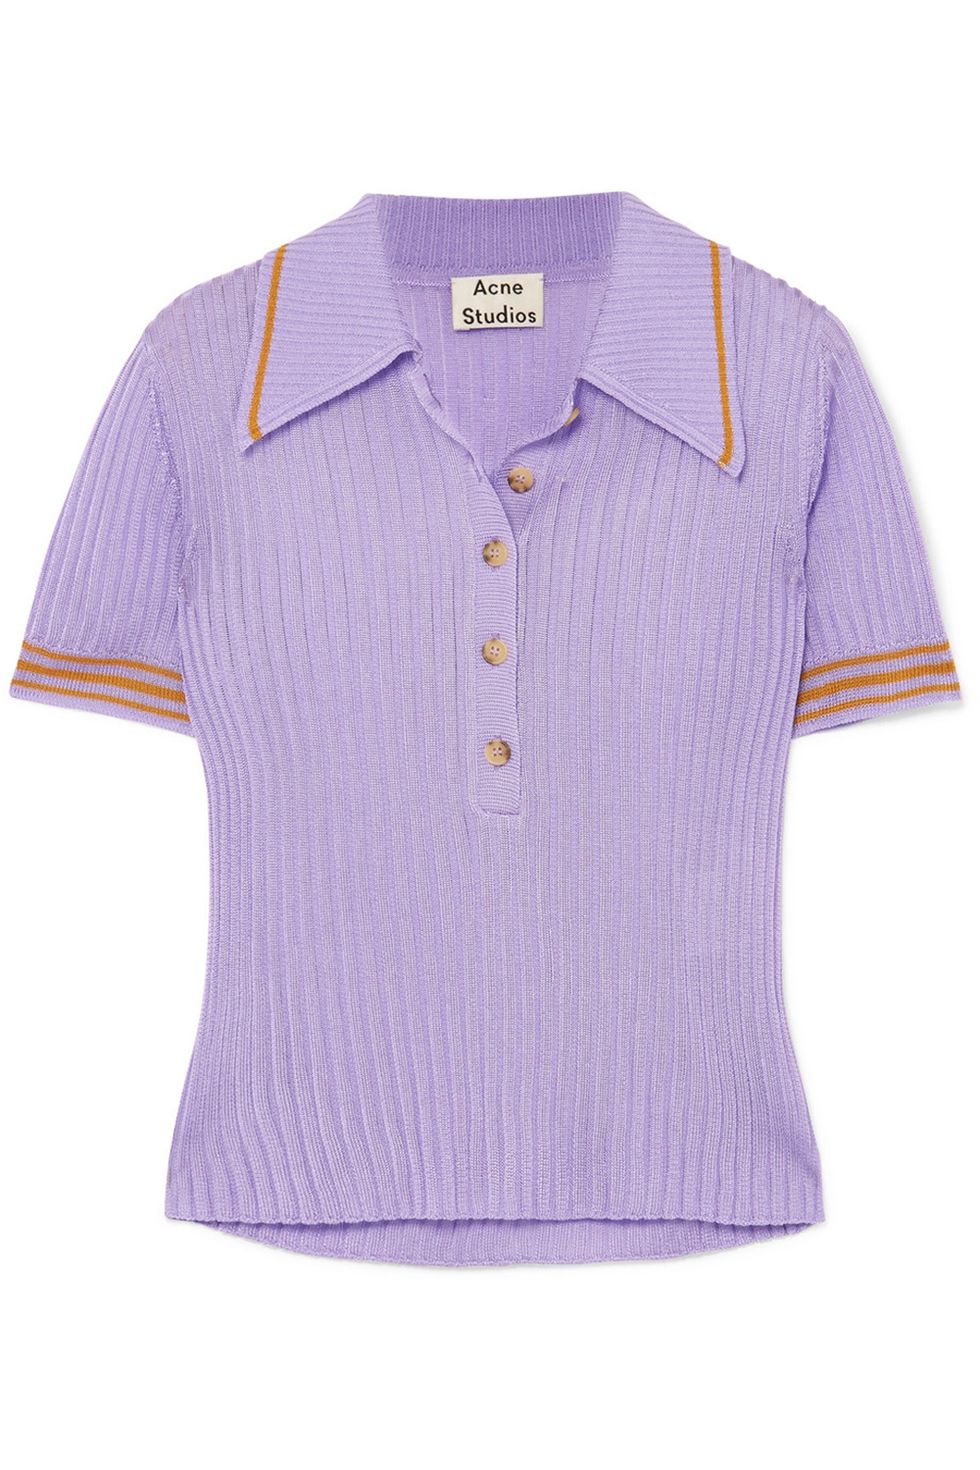 Clothing, White, Sleeve, Purple, Violet, Lavender, T-shirt, Lilac, Polo shirt, Outerwear, 